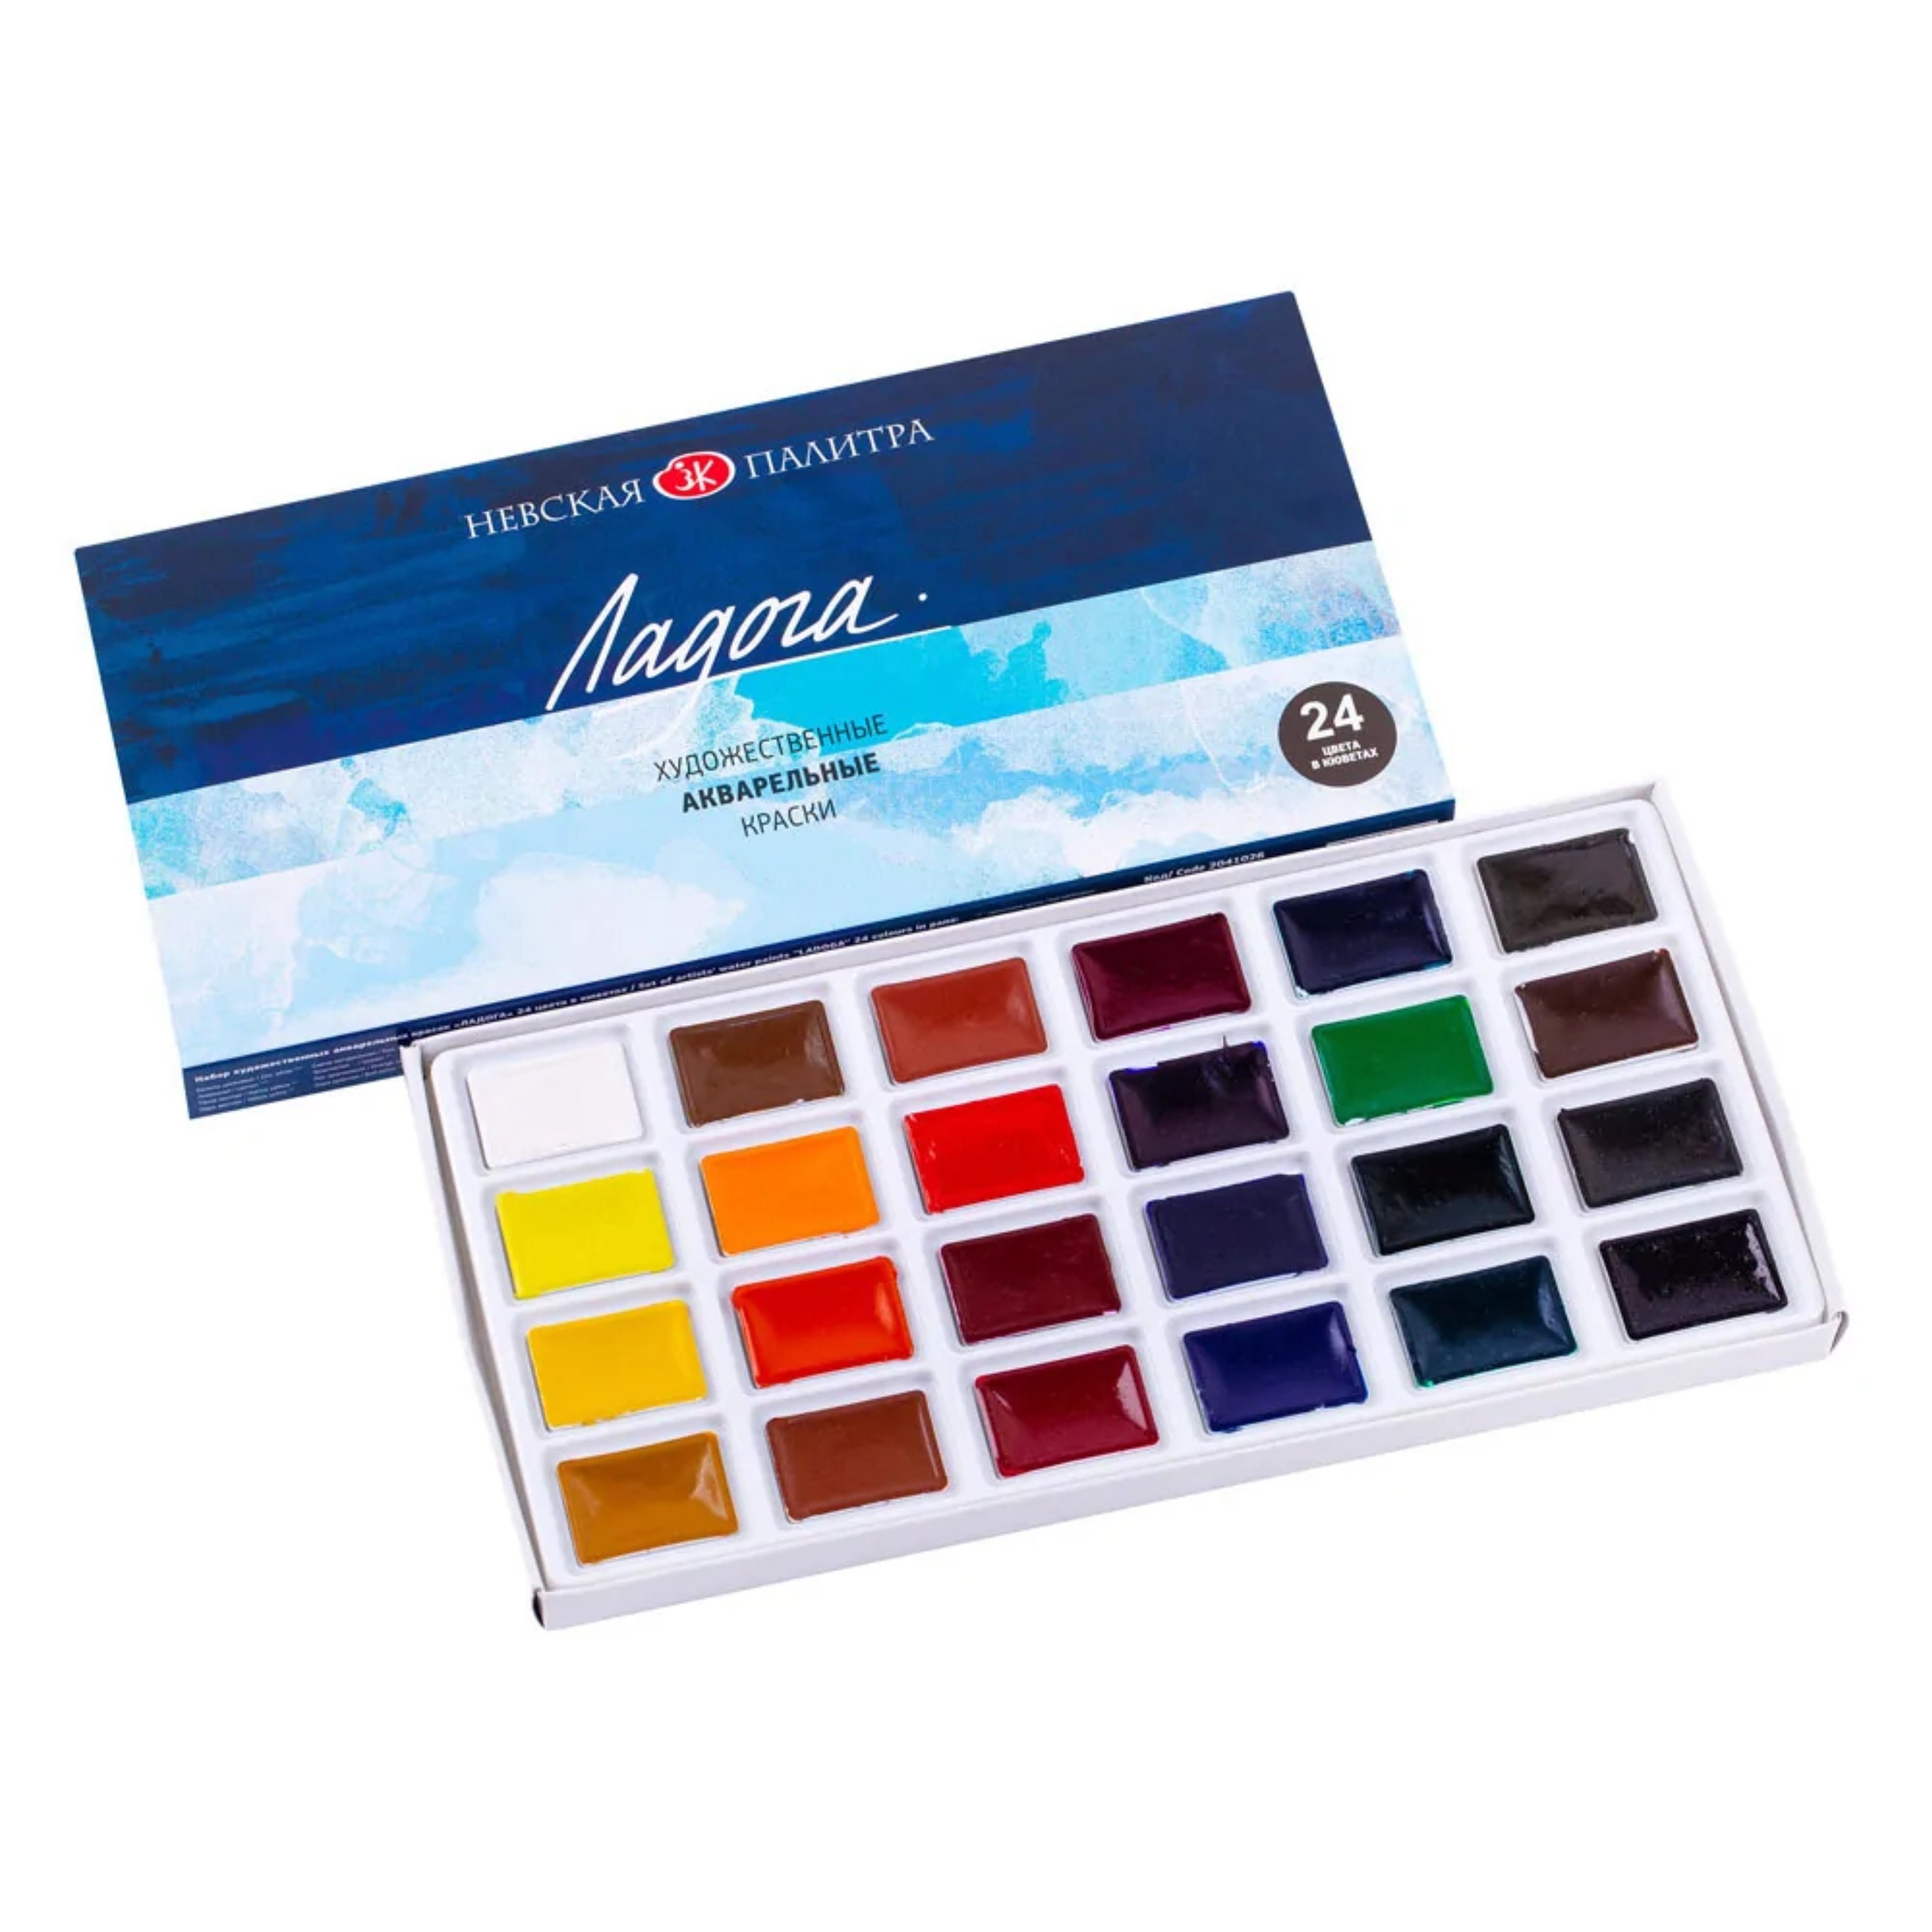  White Nights Watercolor Extra Fine Artists Grade Paint Set 21  Full Pans in Metal Case by Nevskaya Palitra : Arts, Crafts & Sewing